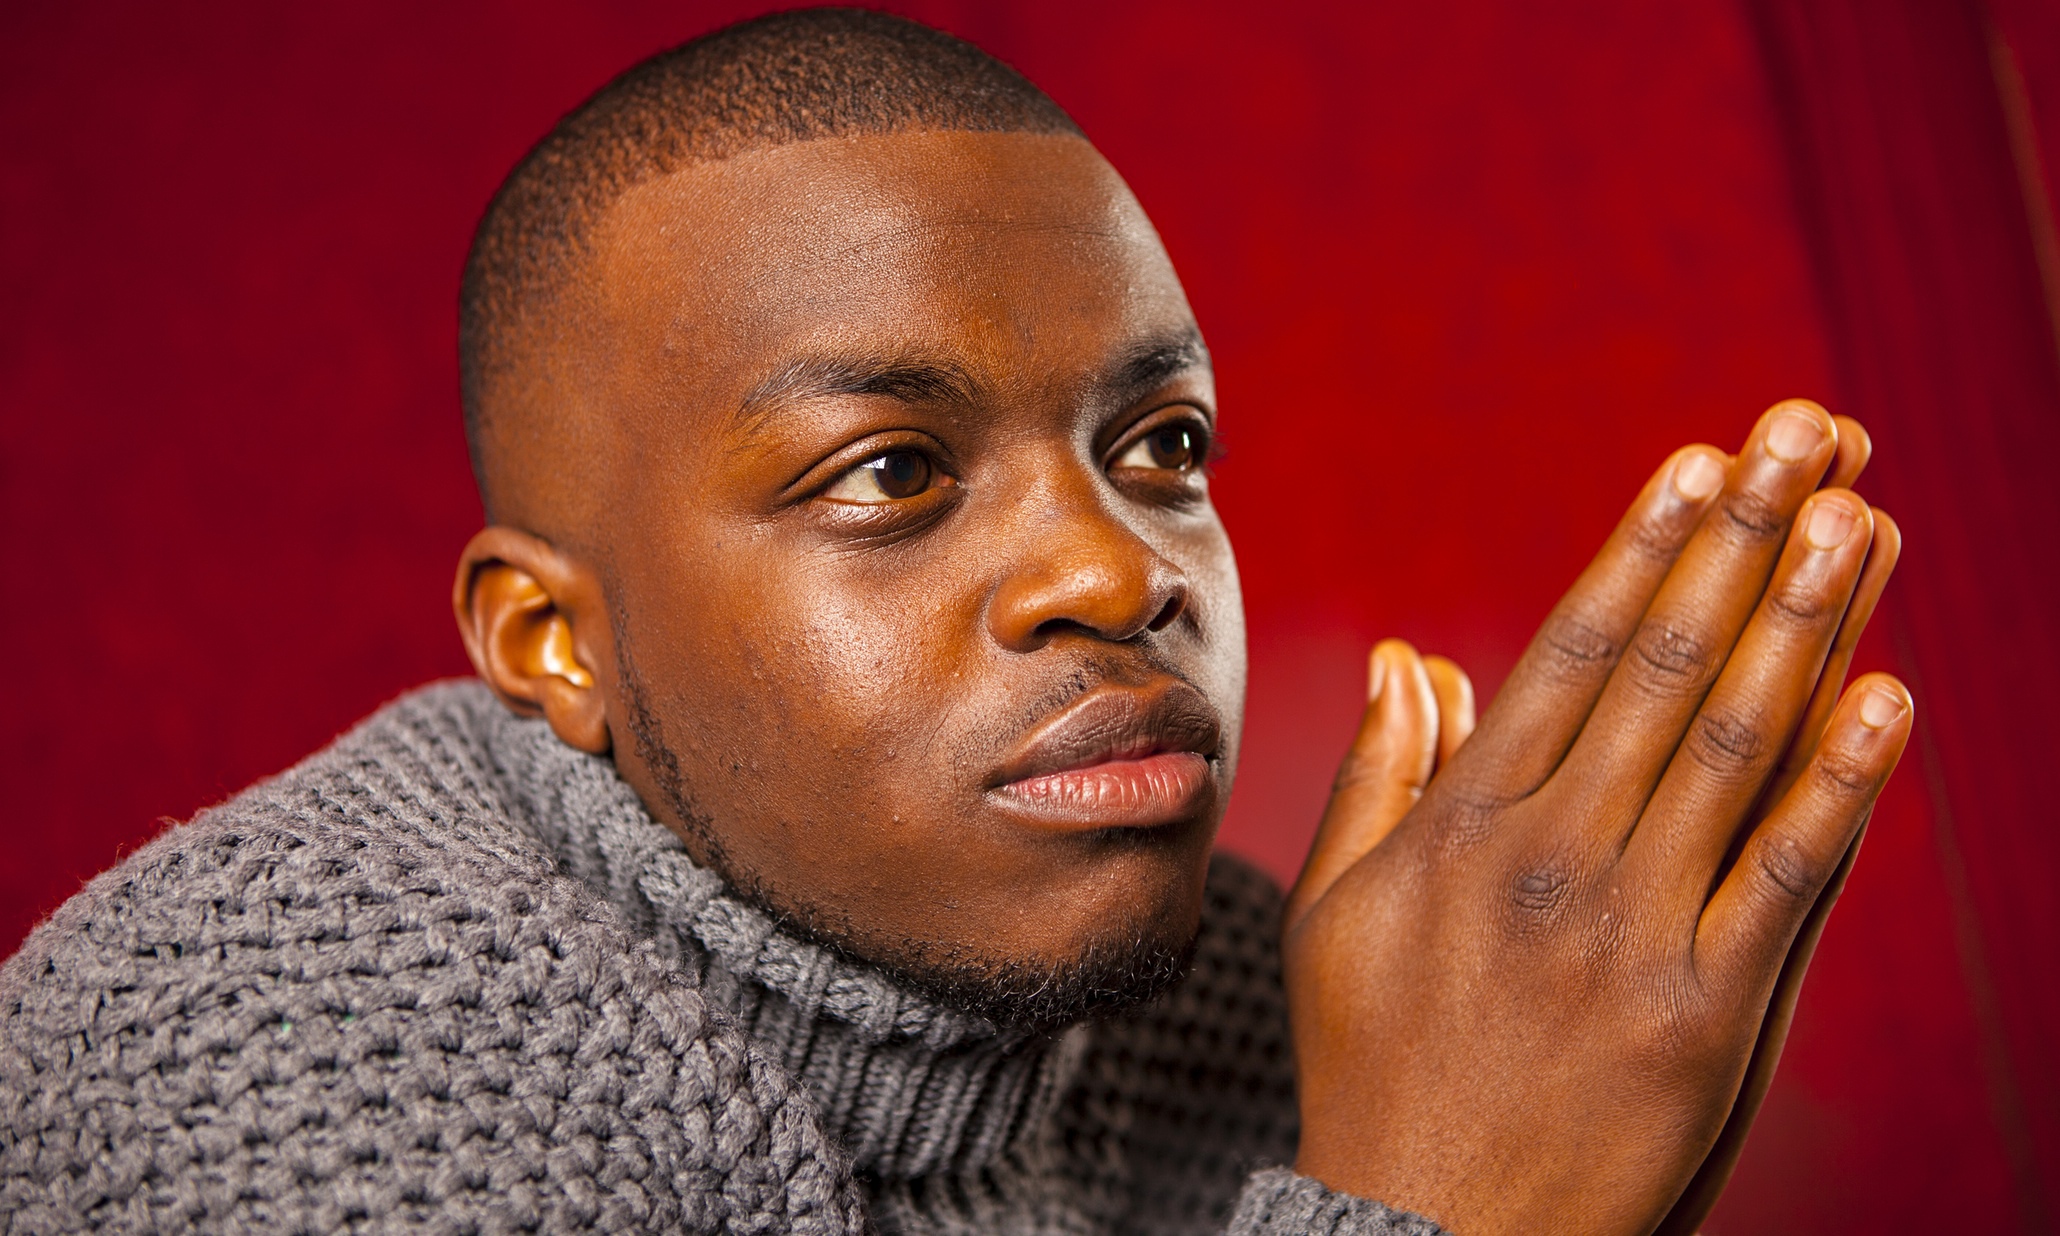 George the Poet on protesting with poetry | Life and style | The Guardian